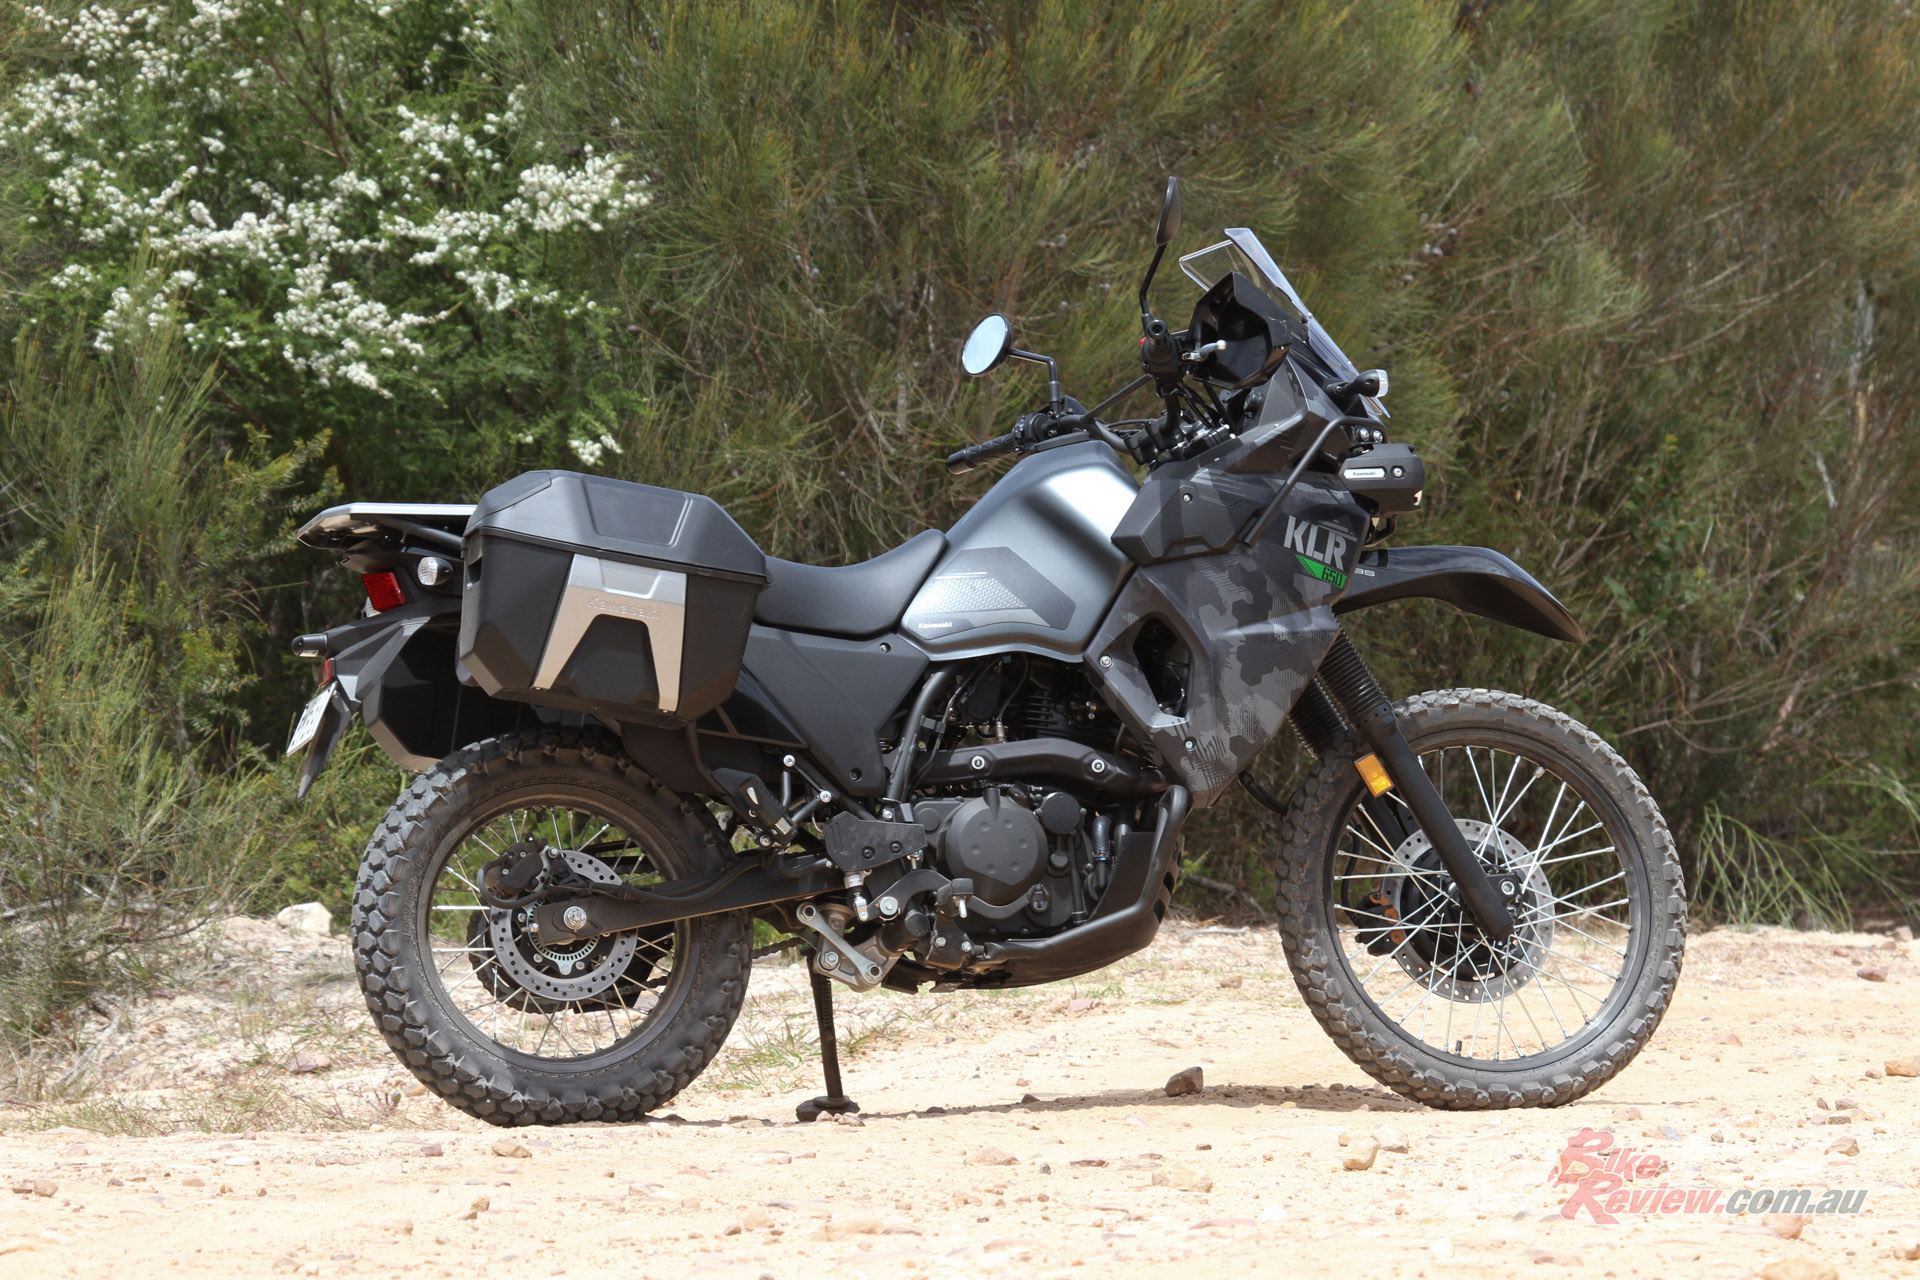 The sizeable fuel tank is balanced out by a tall seat, making the KLR's ride triangle comfortable... 